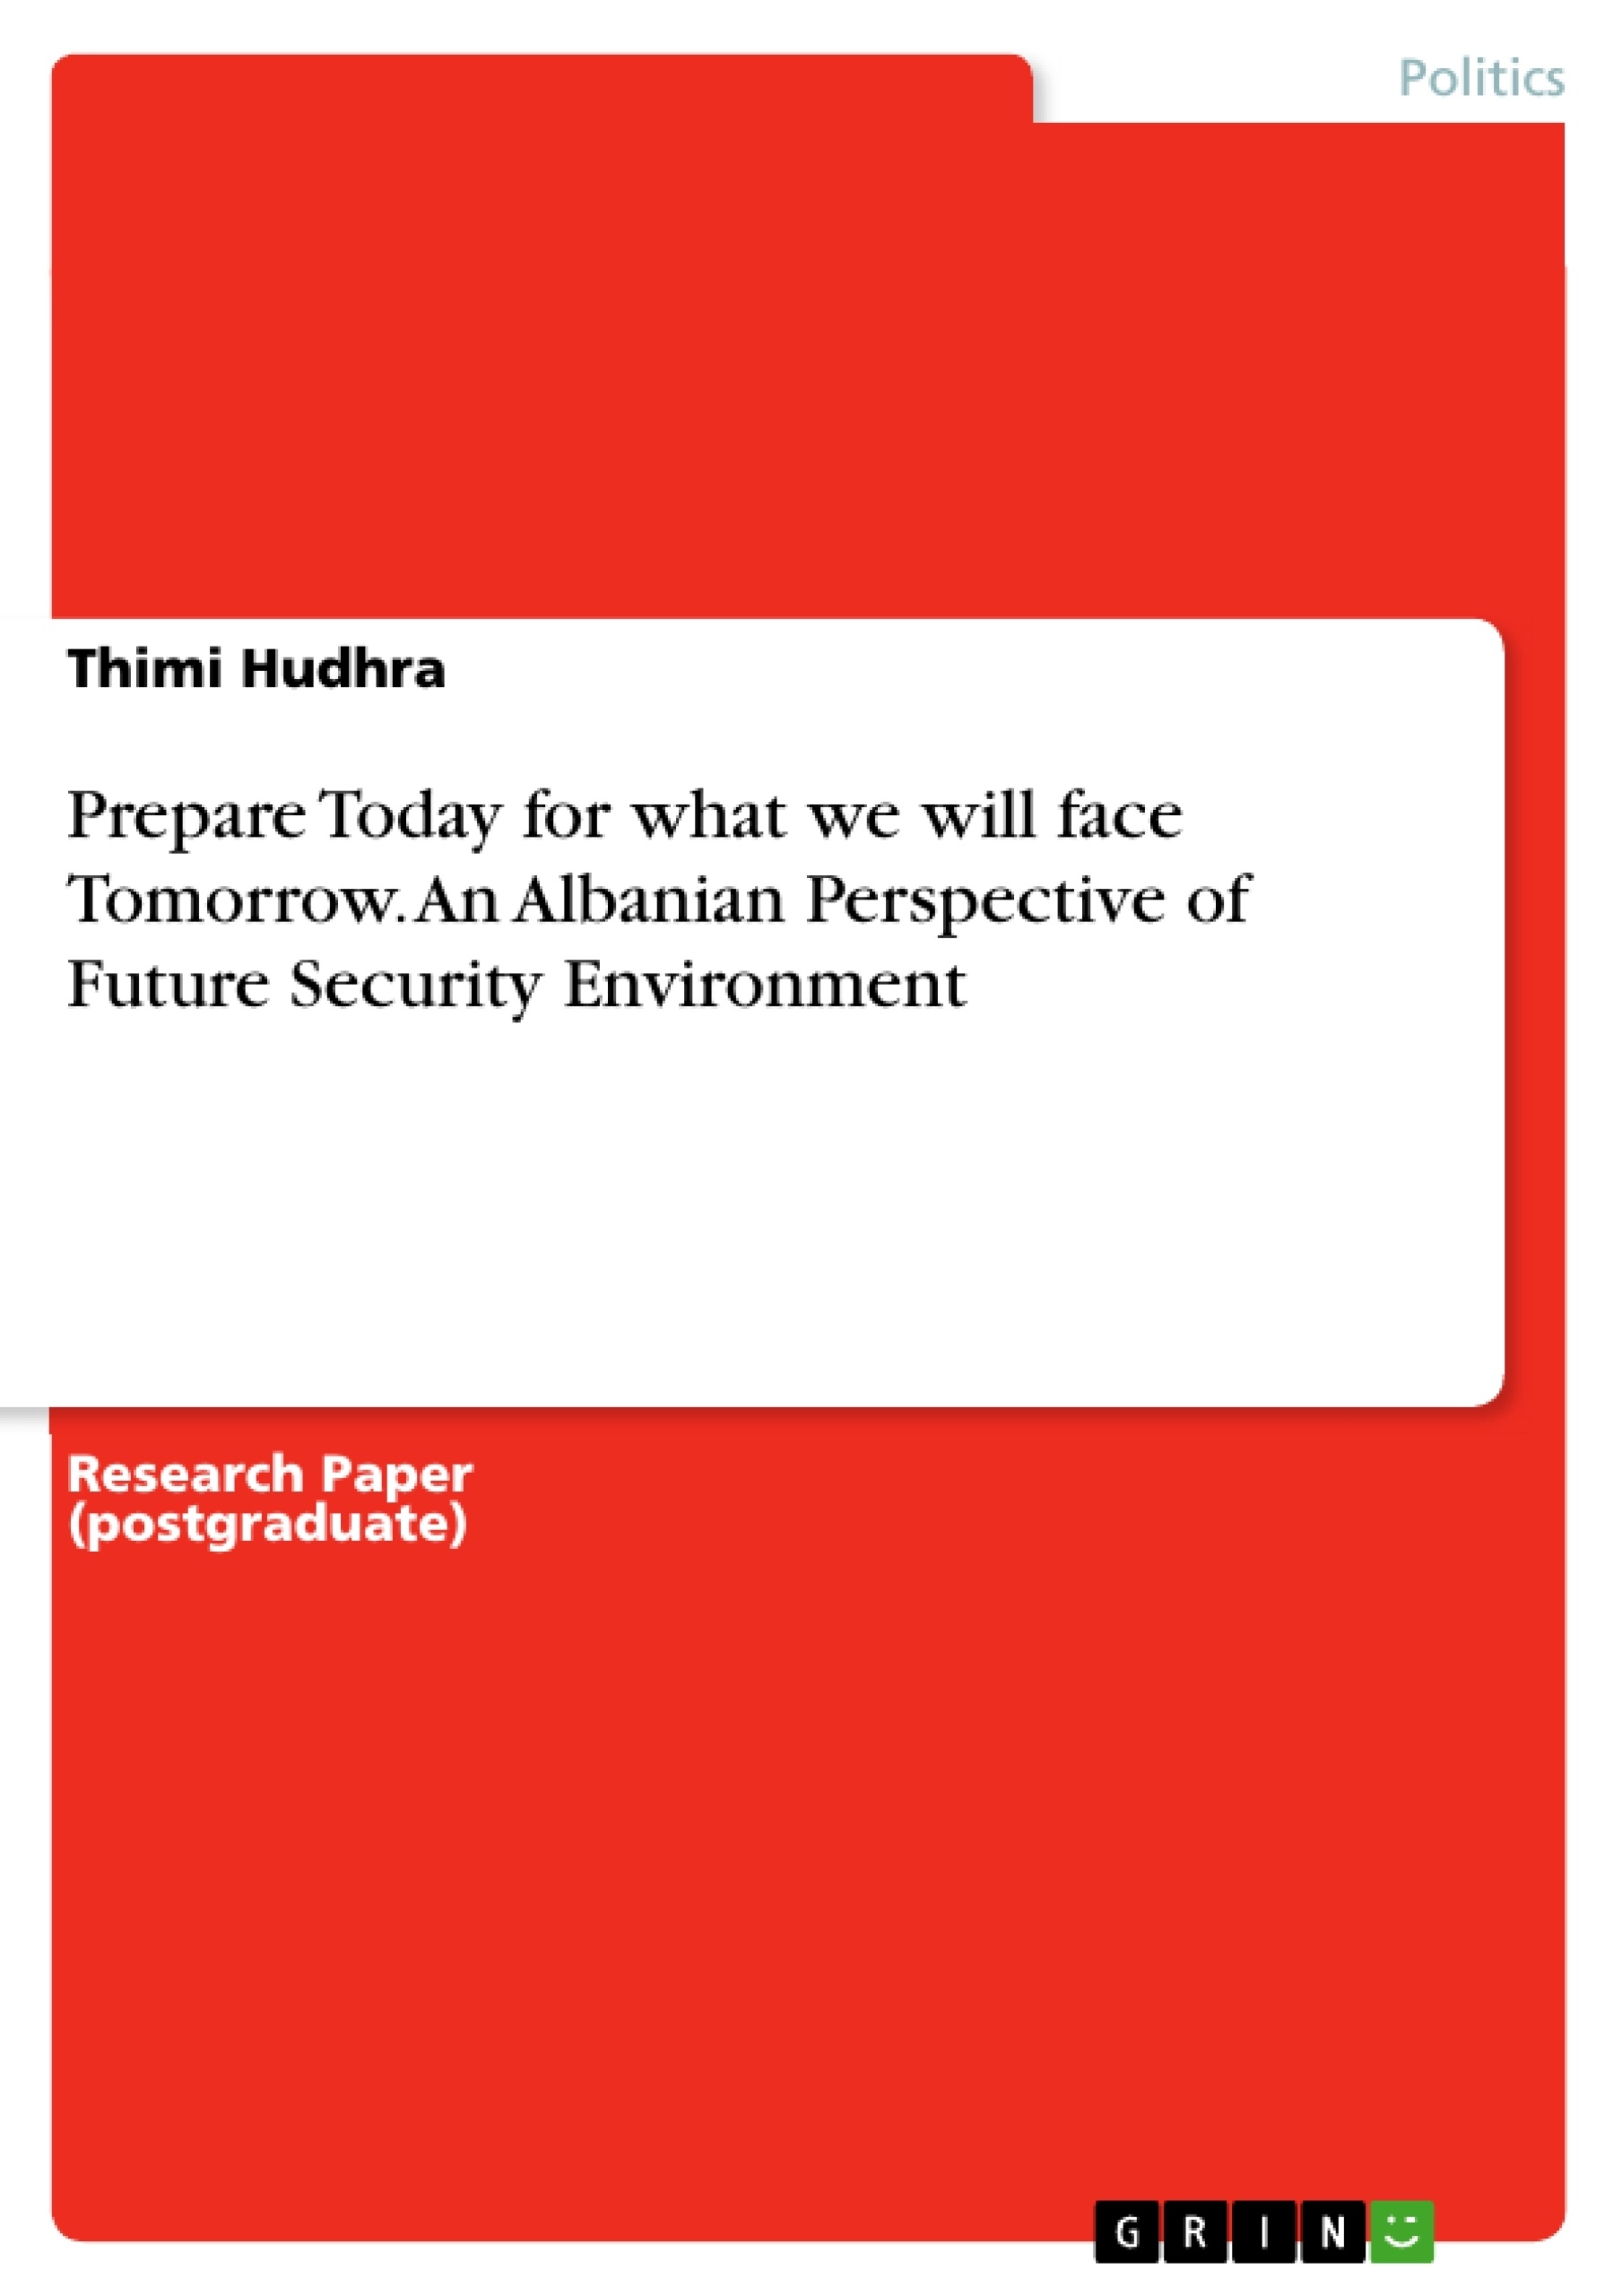 Titre: Prepare Today for what we will face Tomorrow. An Albanian Perspective of Future Security Environment